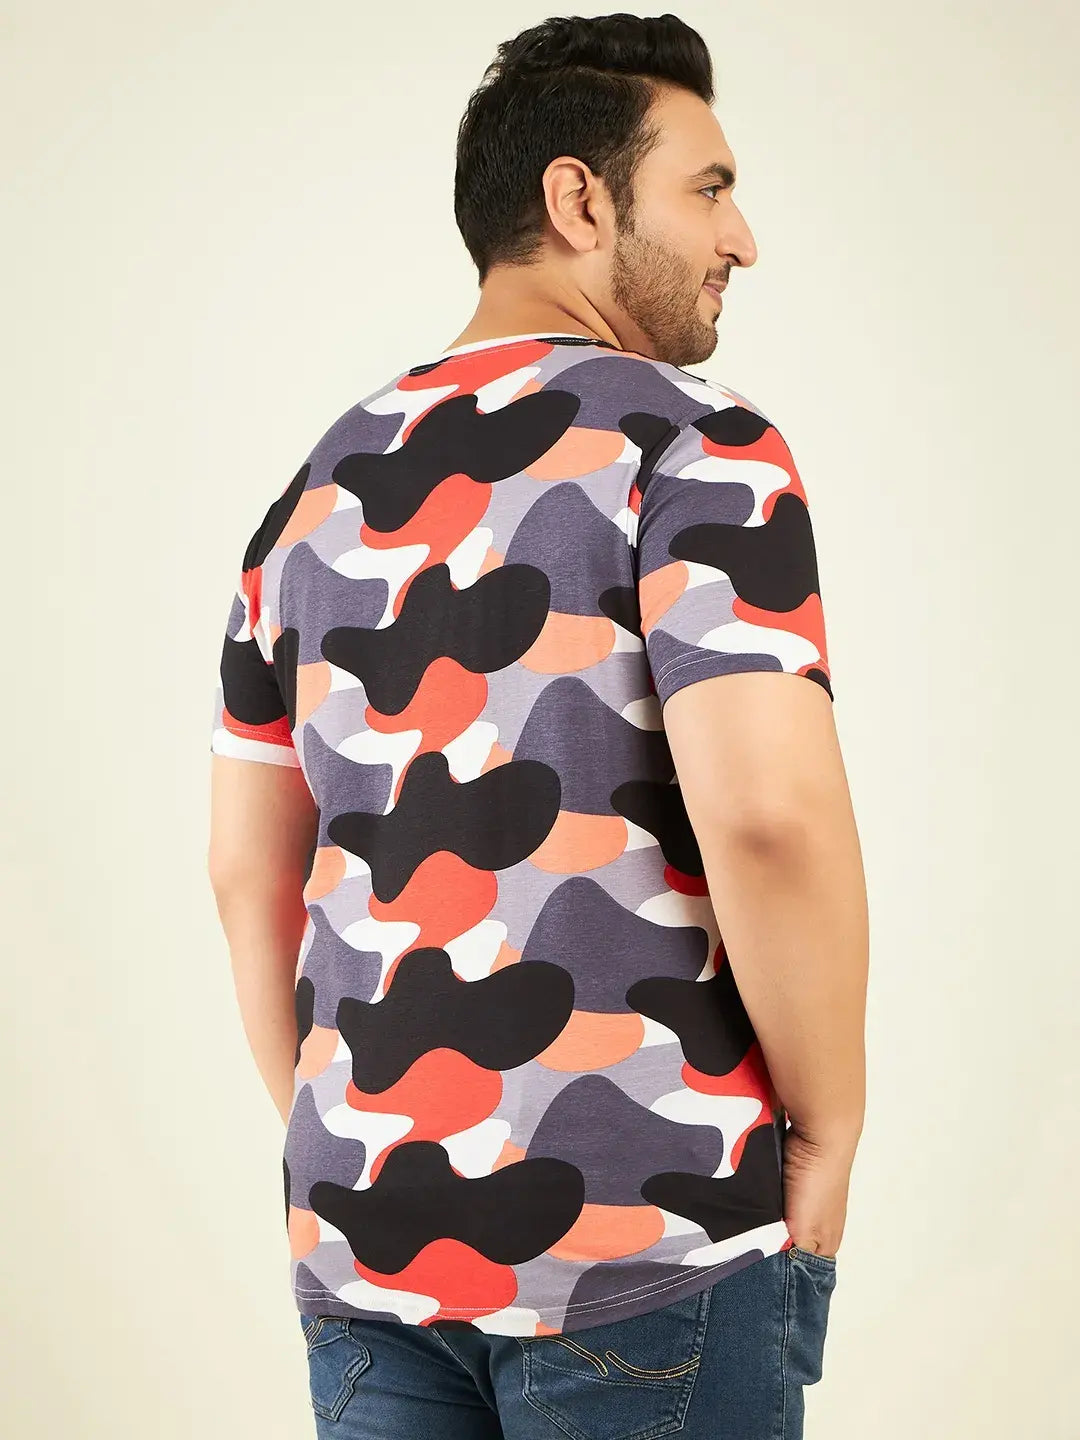 Cow Printed Plus Size T-Shirt  By Rodzen